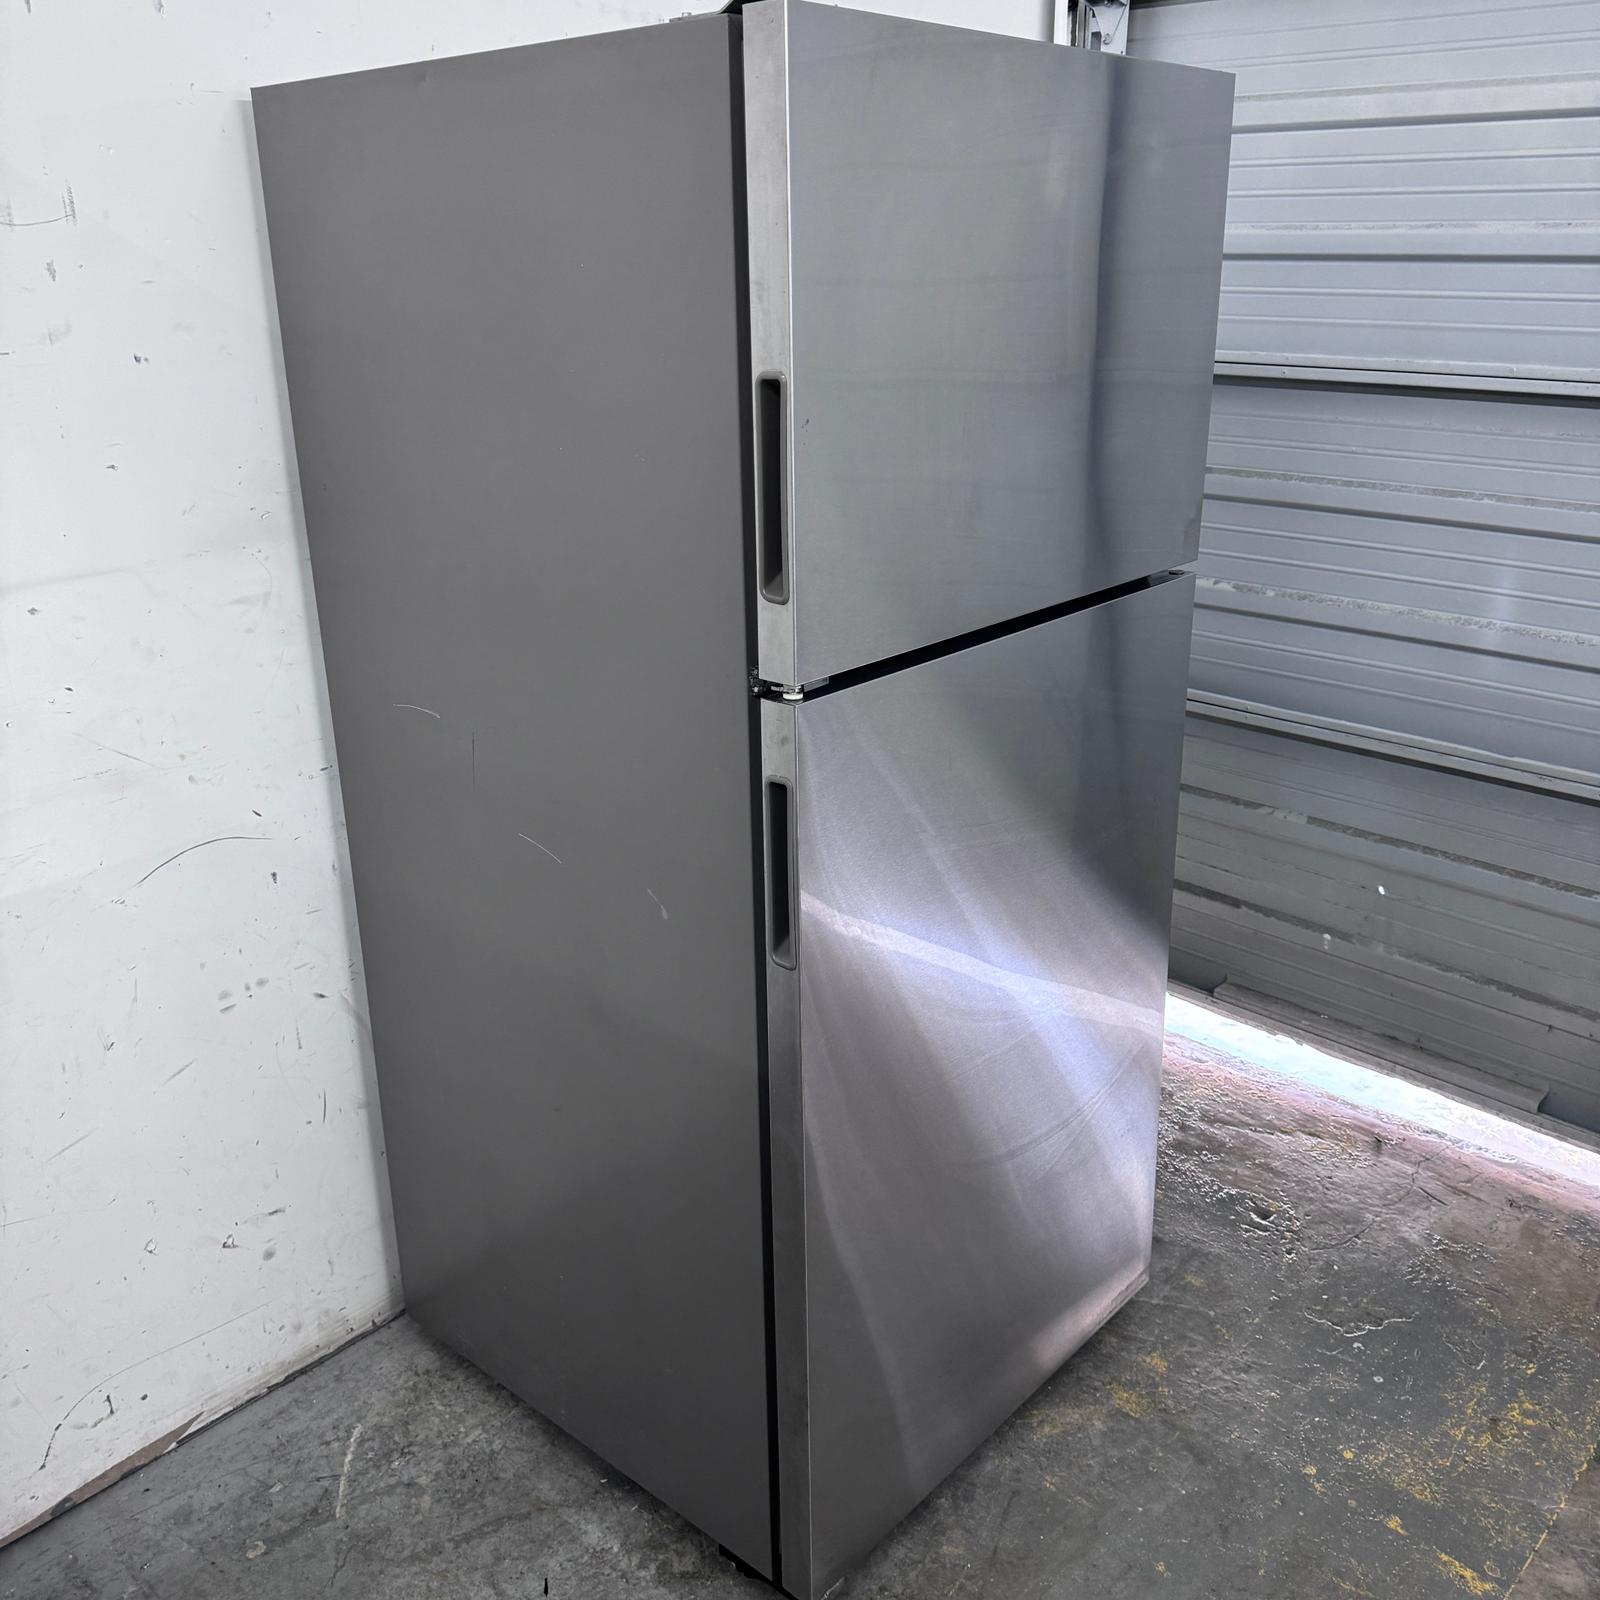 Amana Stainless Steel Top and Bottom Refrigerator